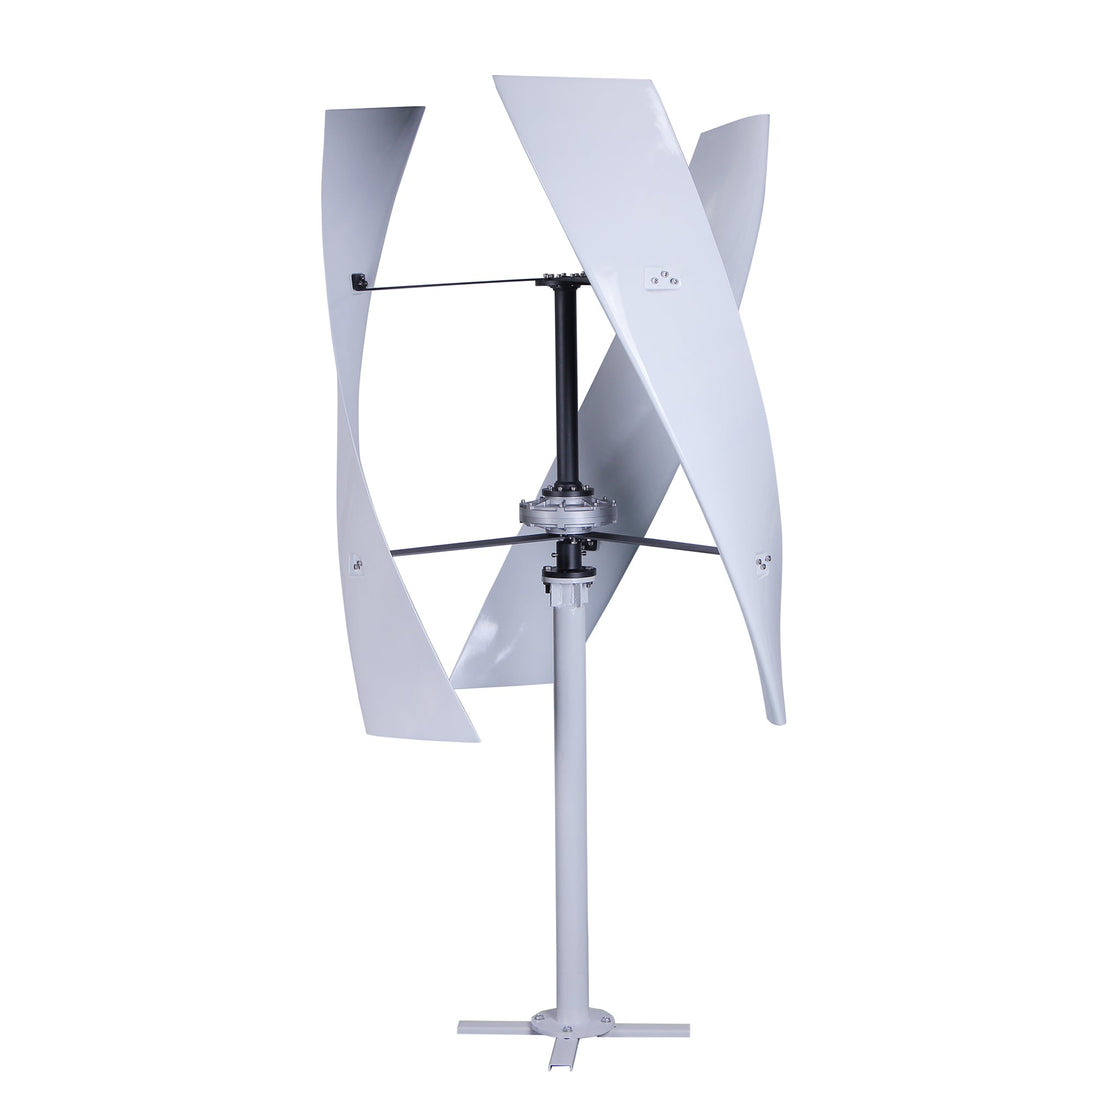 600W Wind Turbines Type X Vertical Axis Wholesale